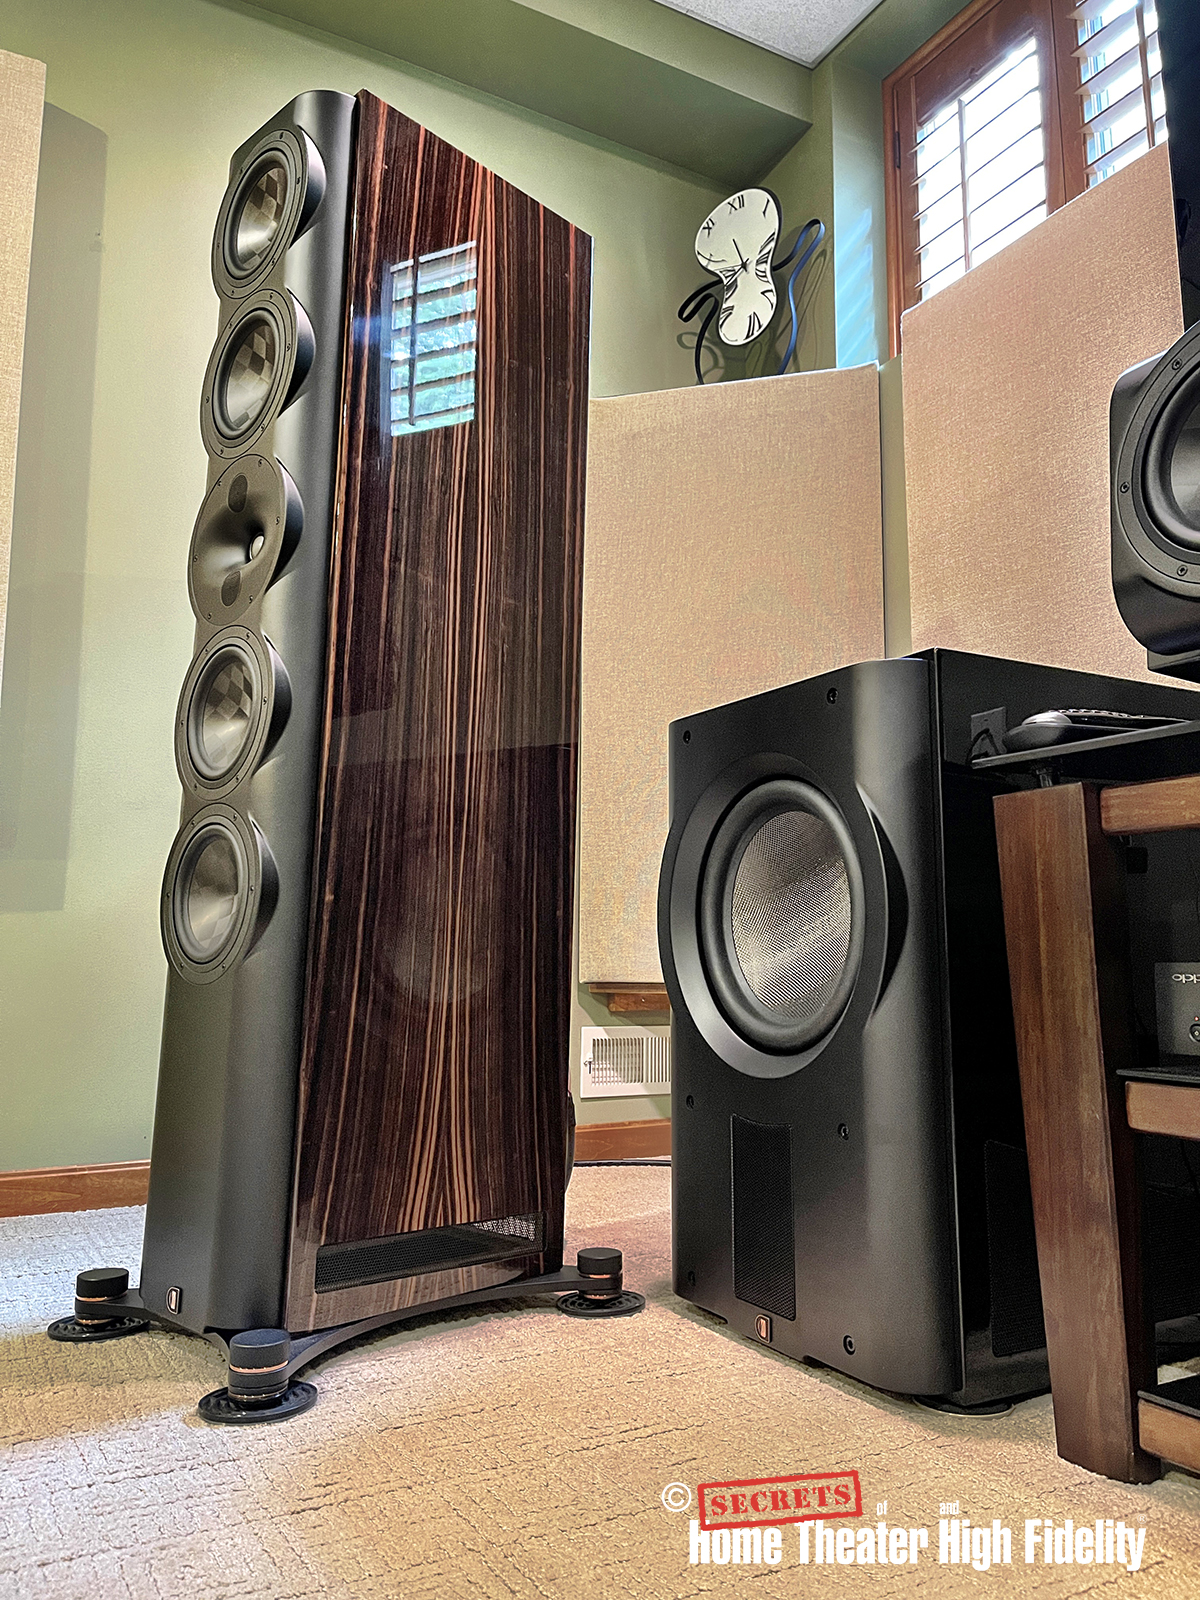 Perlisten Audio 5.2 Channel Home Theater System Speakers and sub